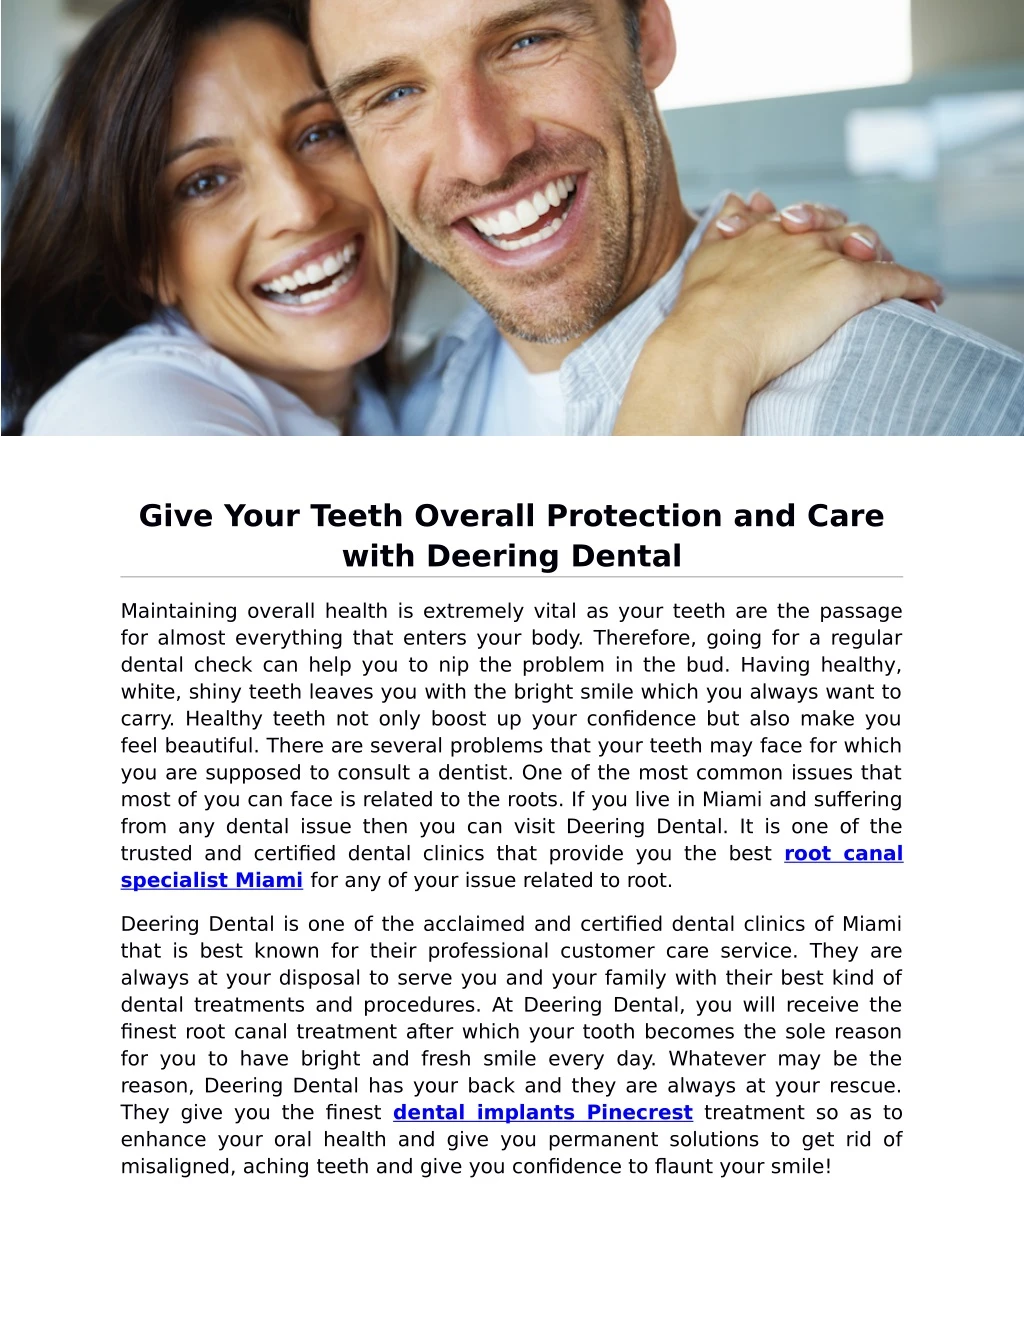 give your teeth overall protection and care with